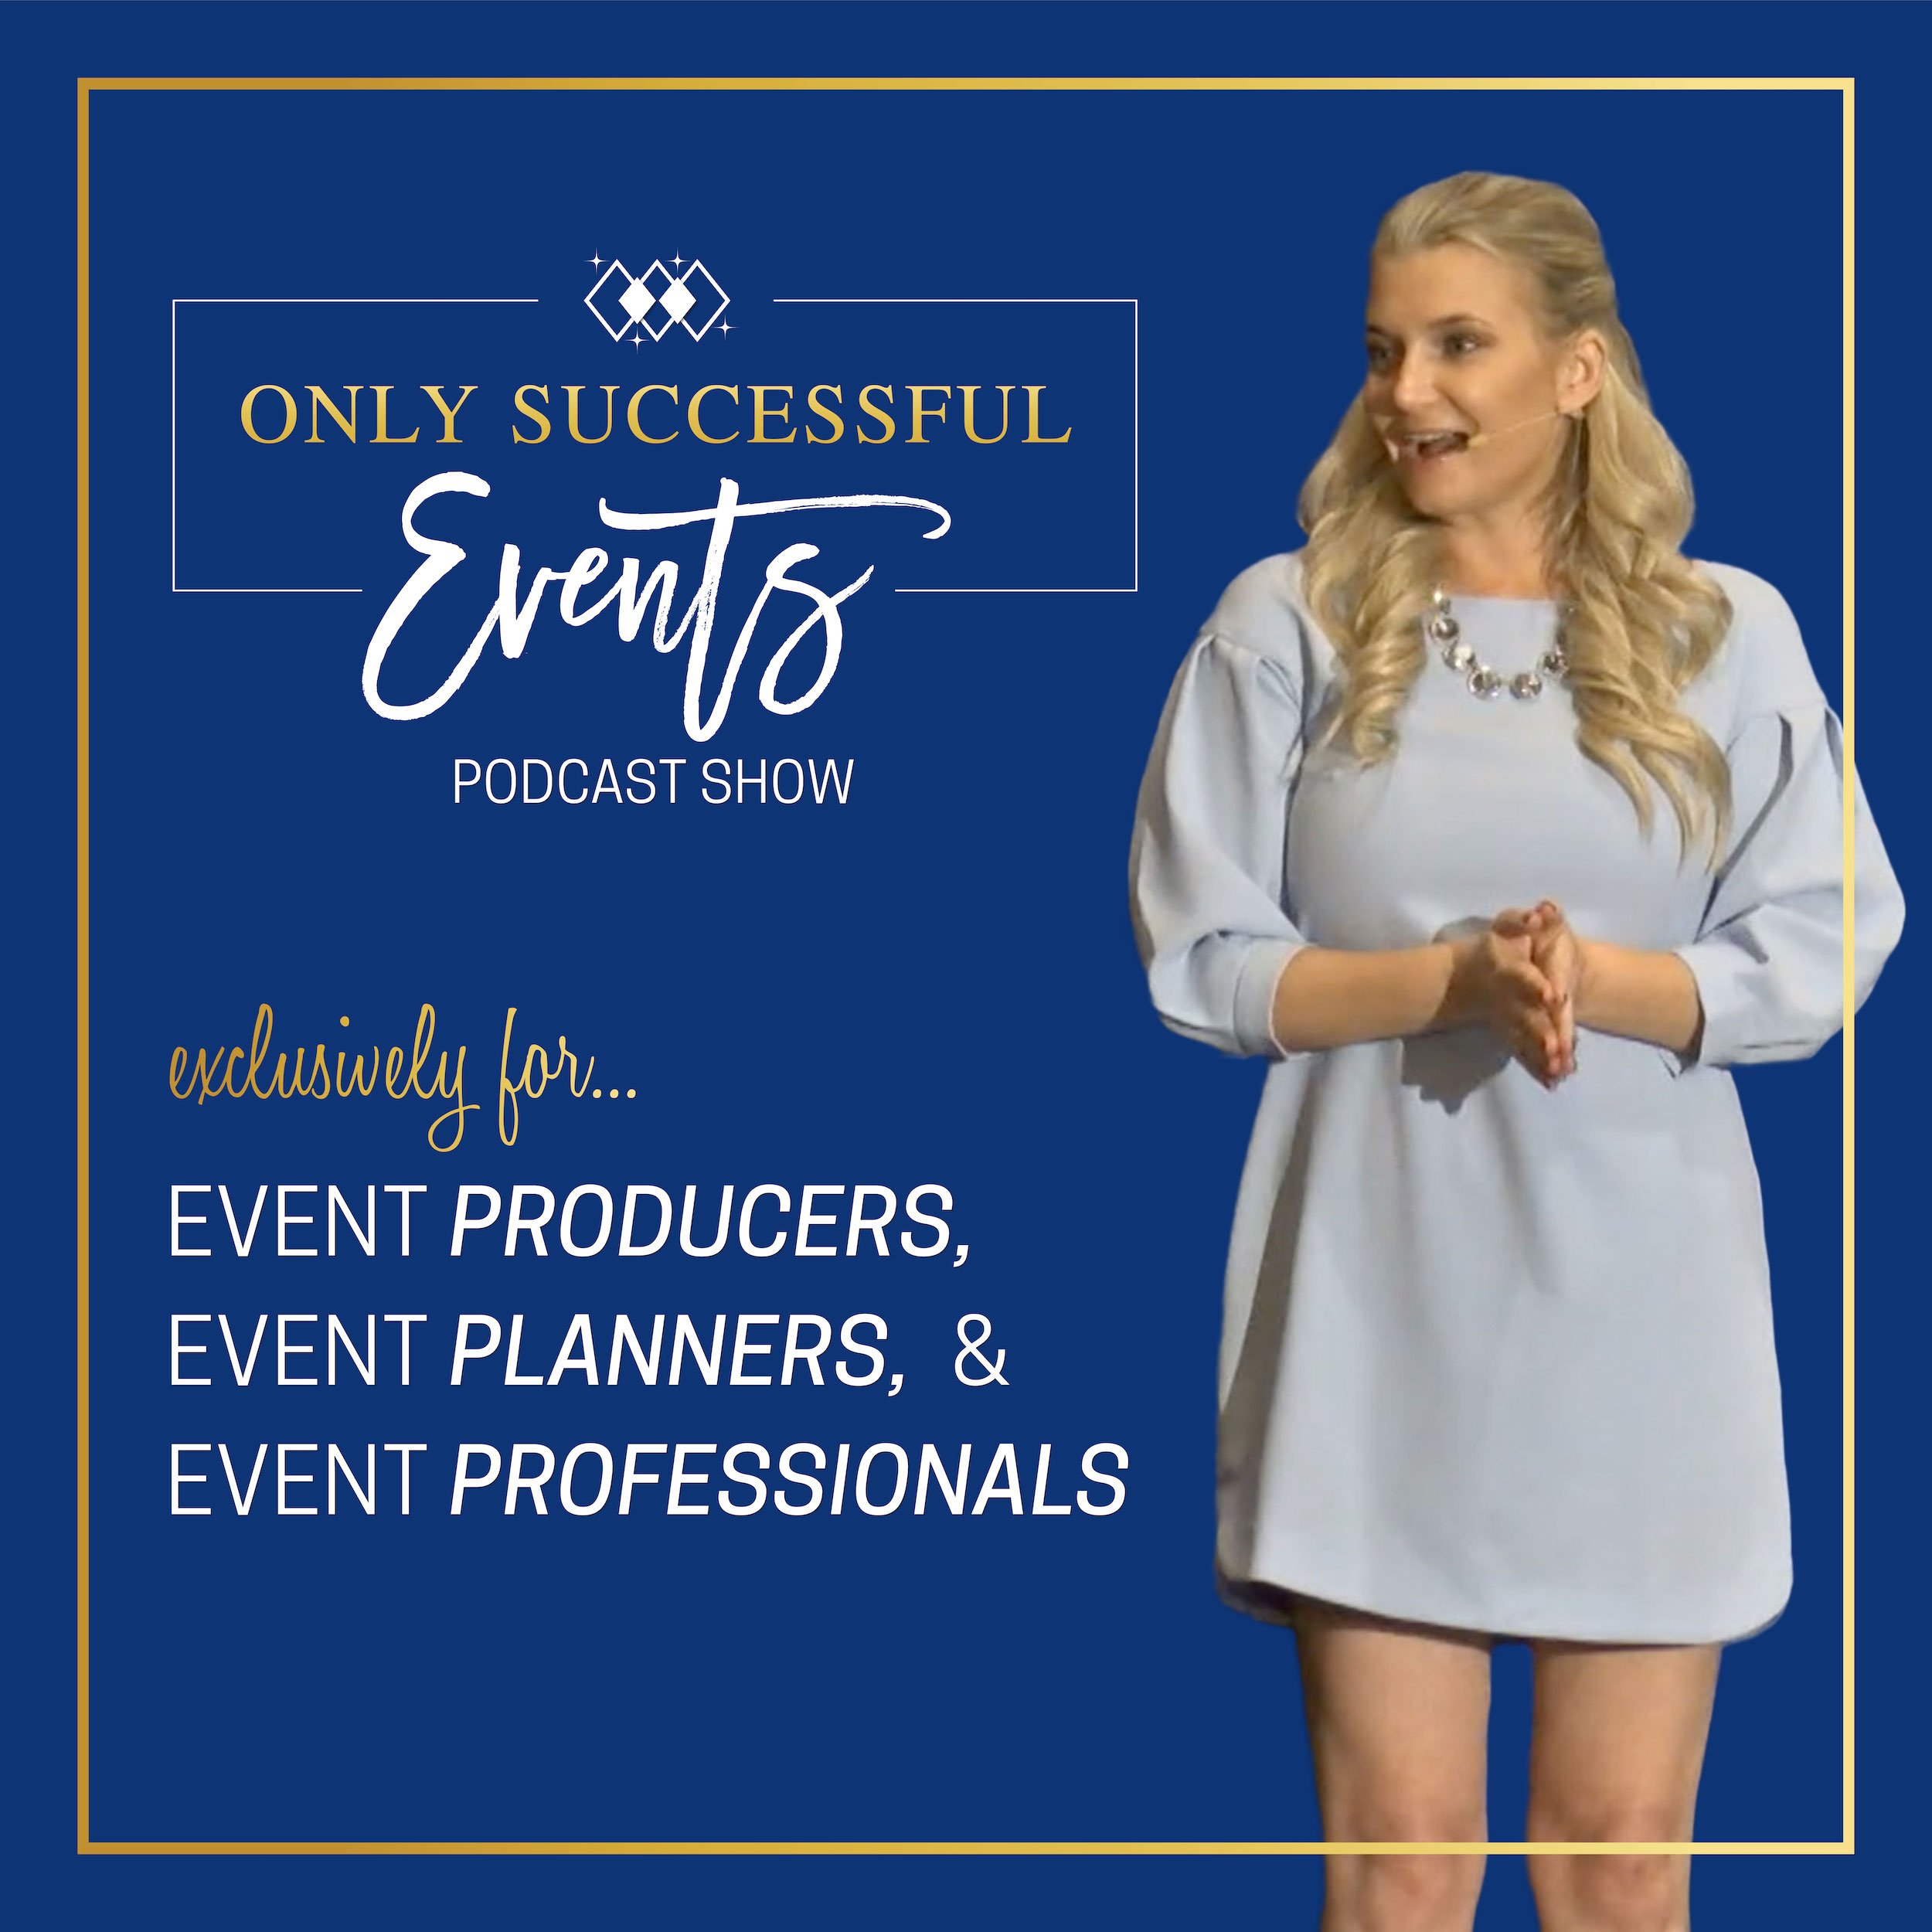 Woman with blonde hair in a light blue dress speaking on the only successful event show. Blue background with text that reads exclusively for event producers, planners, and professionals